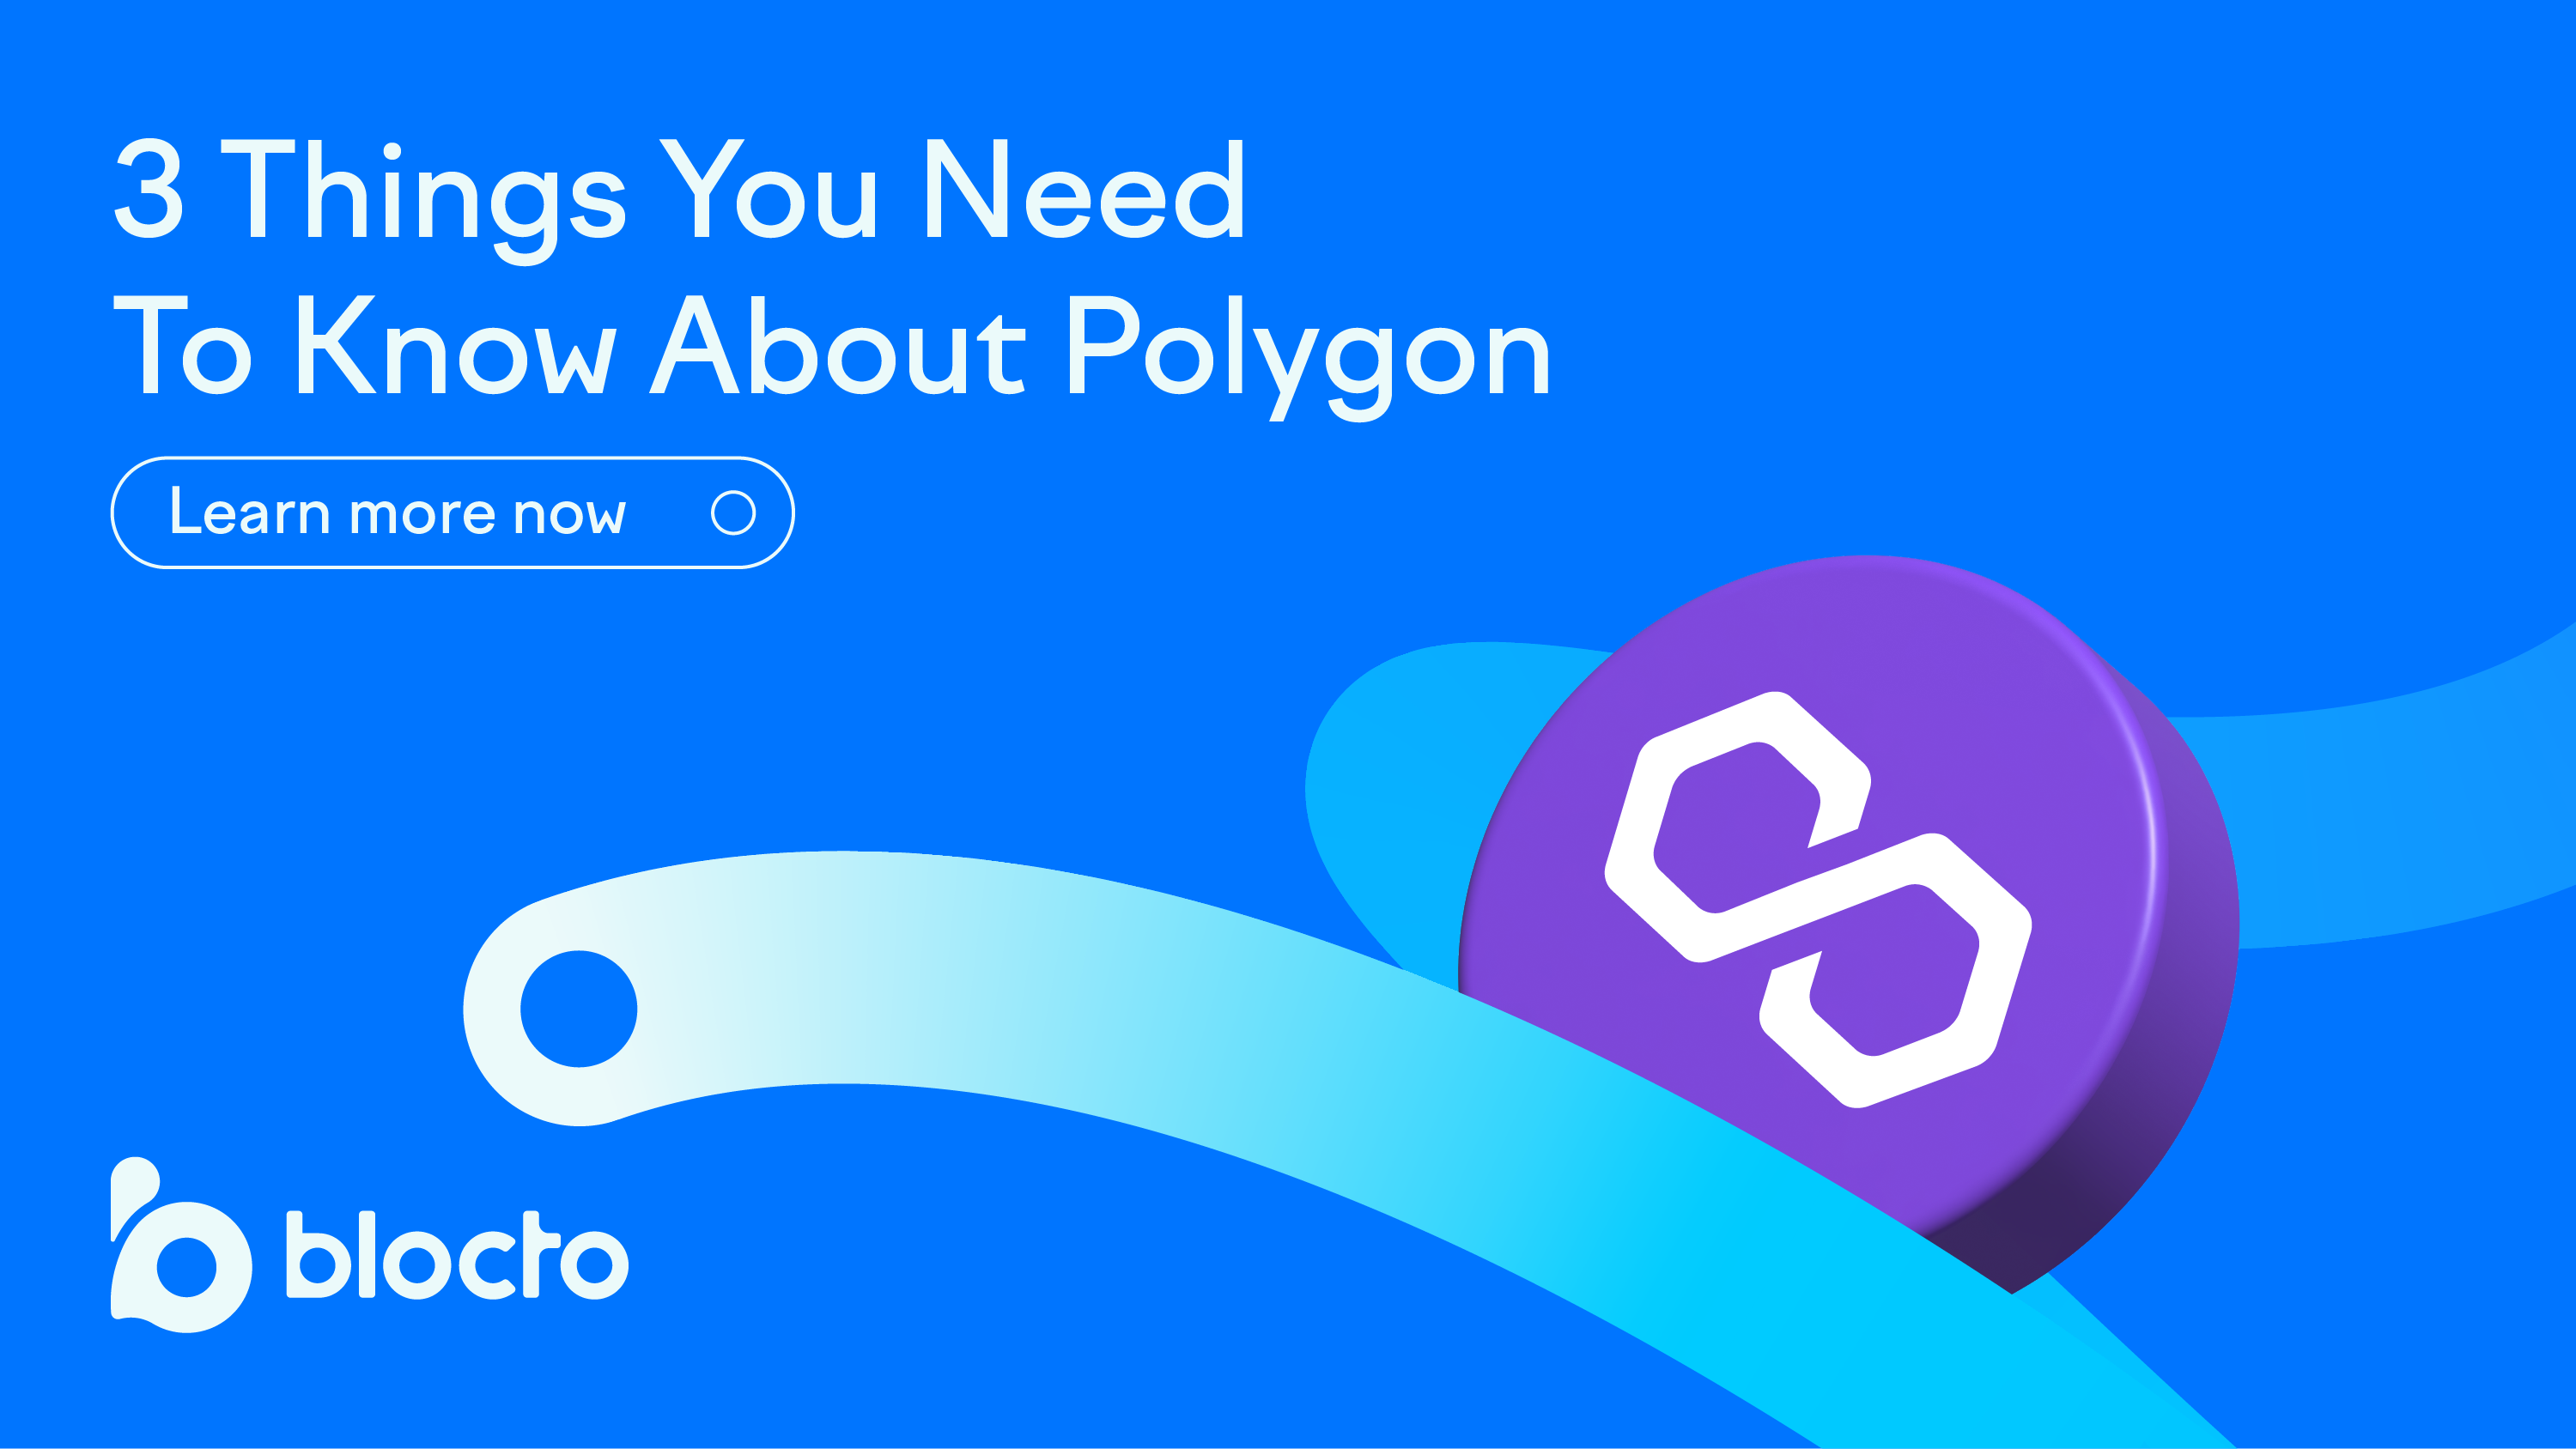 Polygon is a blockchain platform and Ethereum scaling solution to provide faster and more affordable transactions while maintaining security. Find out the 3 things you need to know about polygon.